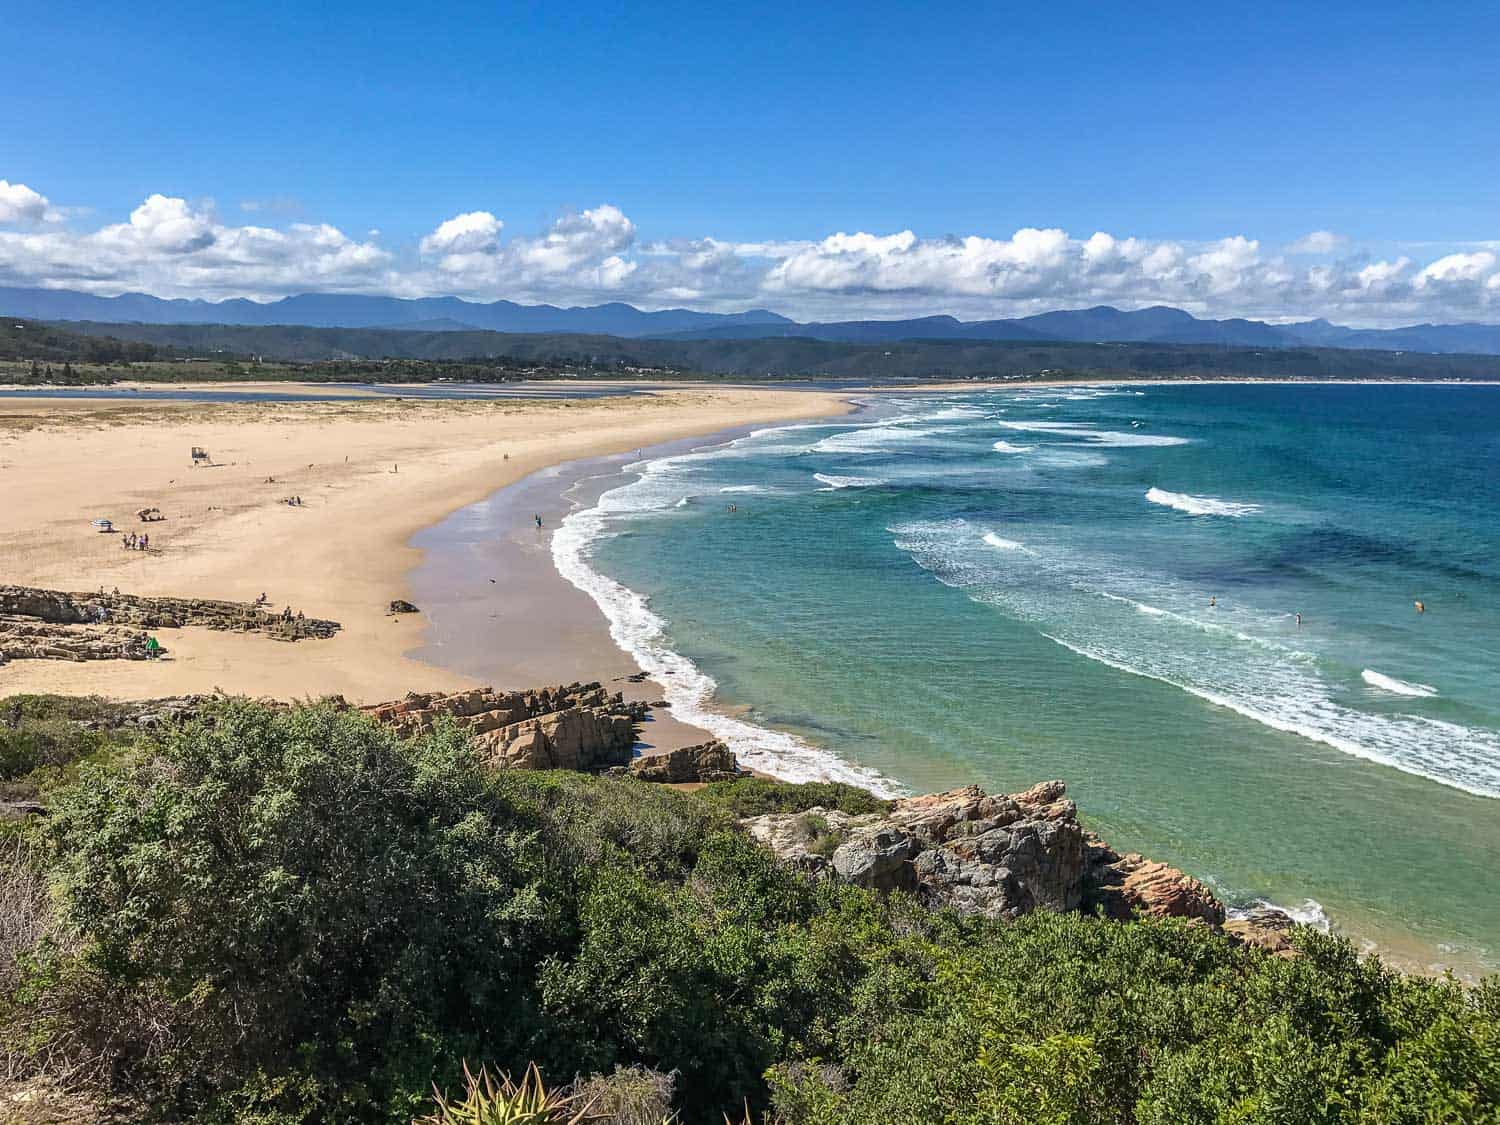 Lookout Beach in Plettenberg Bay, South Africa